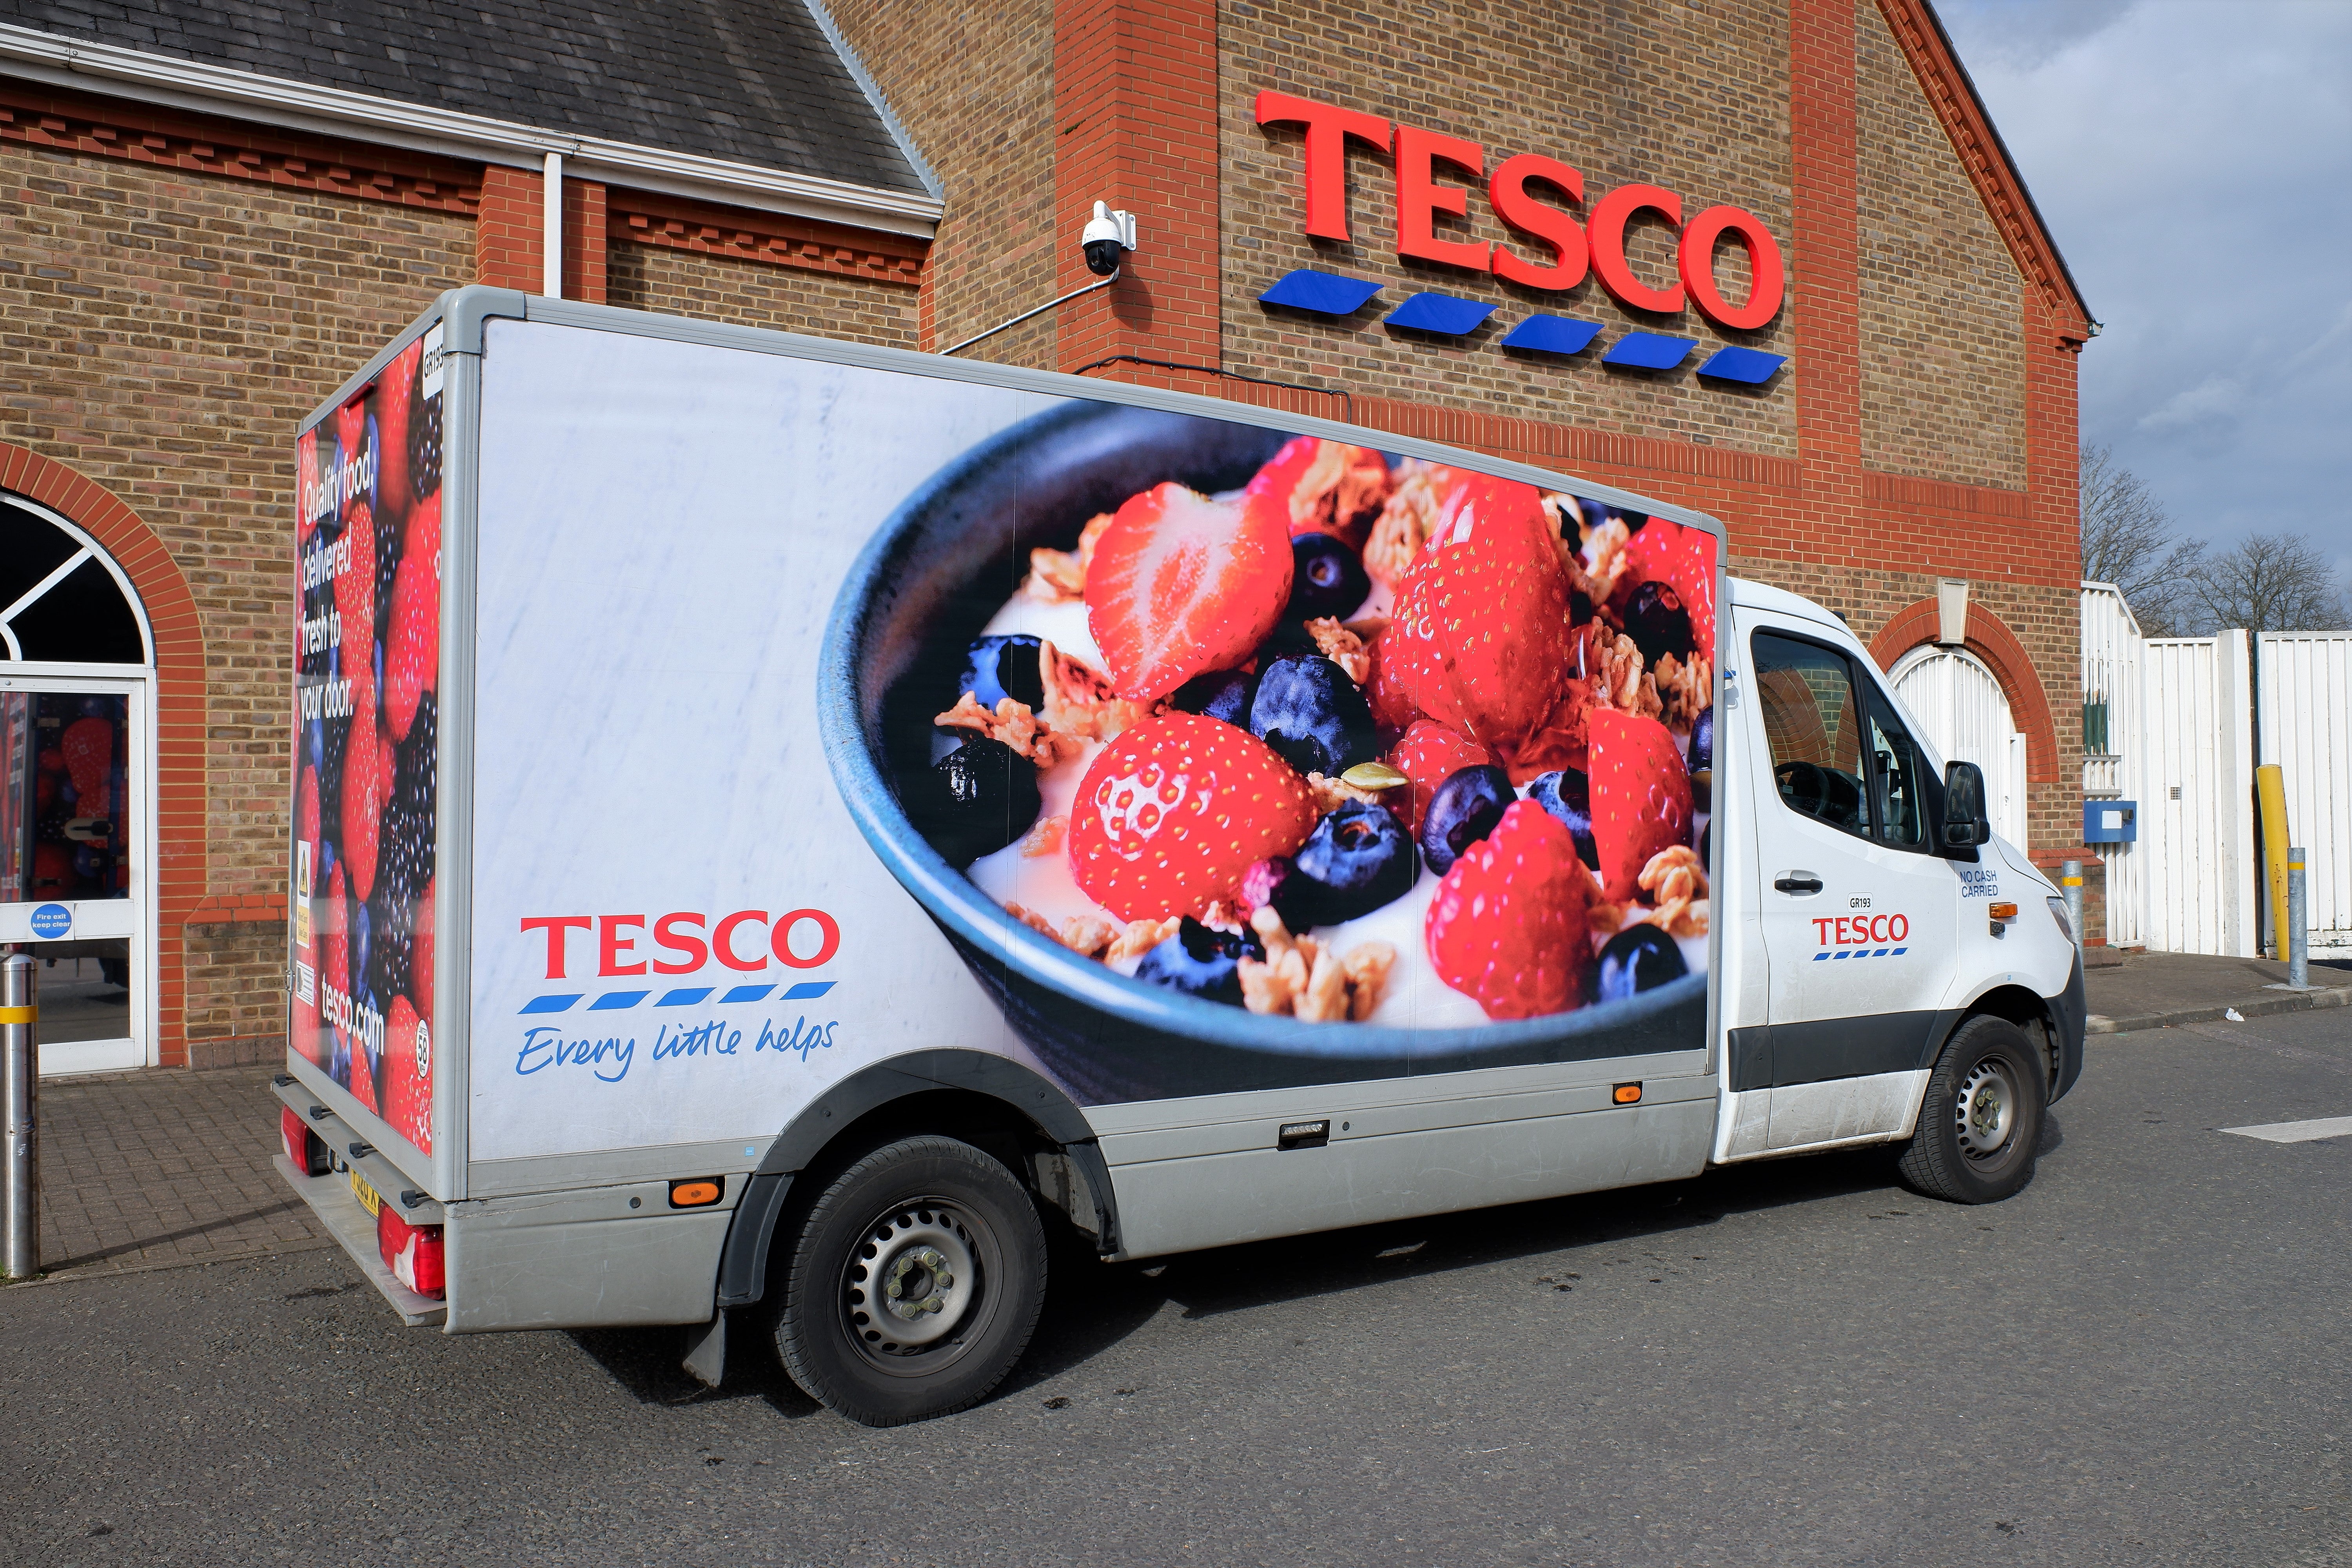 Tesco is set to scrap ‘use by’ dates from 30 of its yogurt products